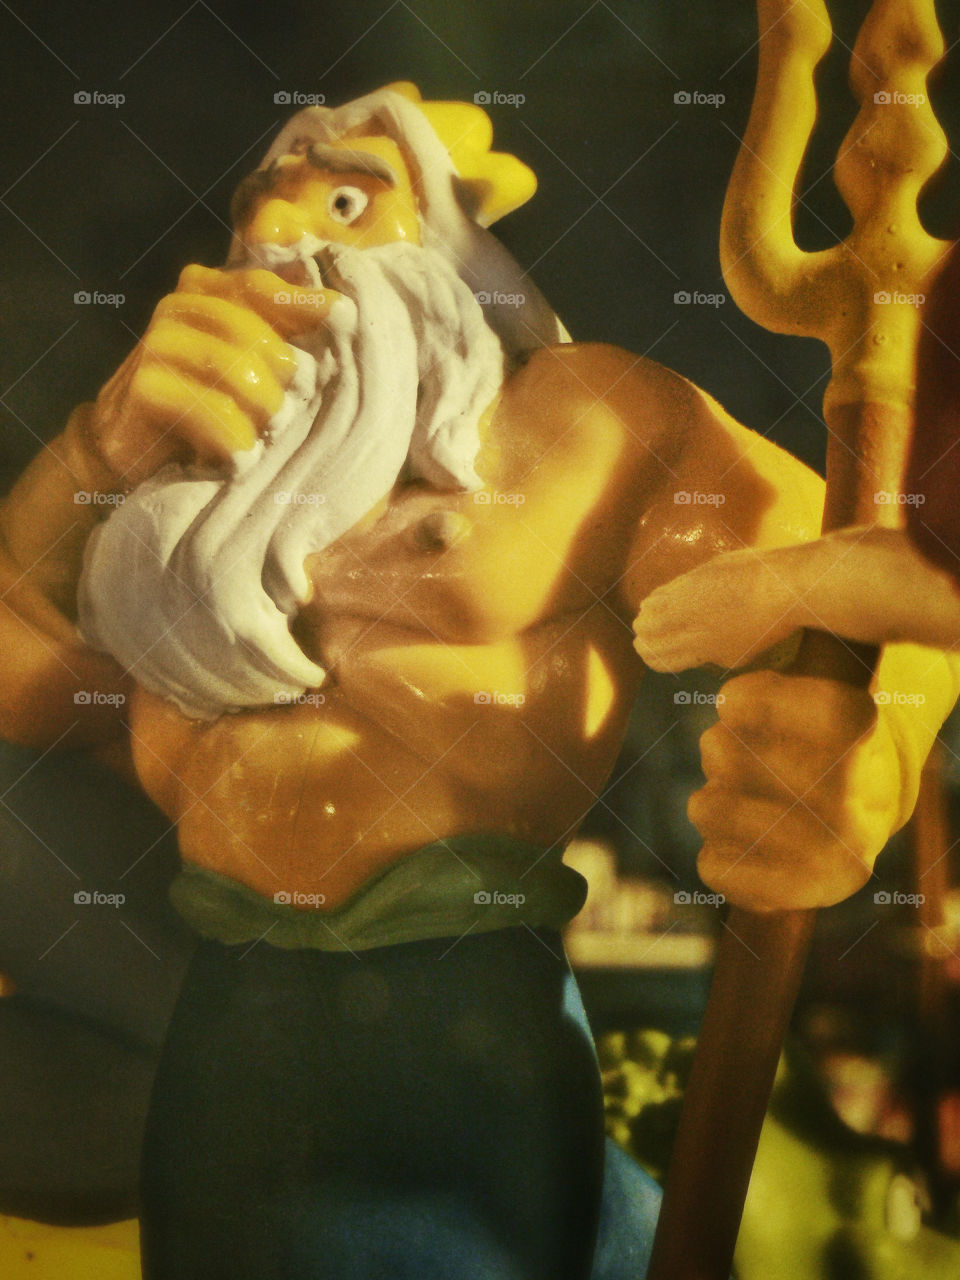 Triton on for Size | A Disney Little Mermaid King Triton figurine, probably from the 90s.